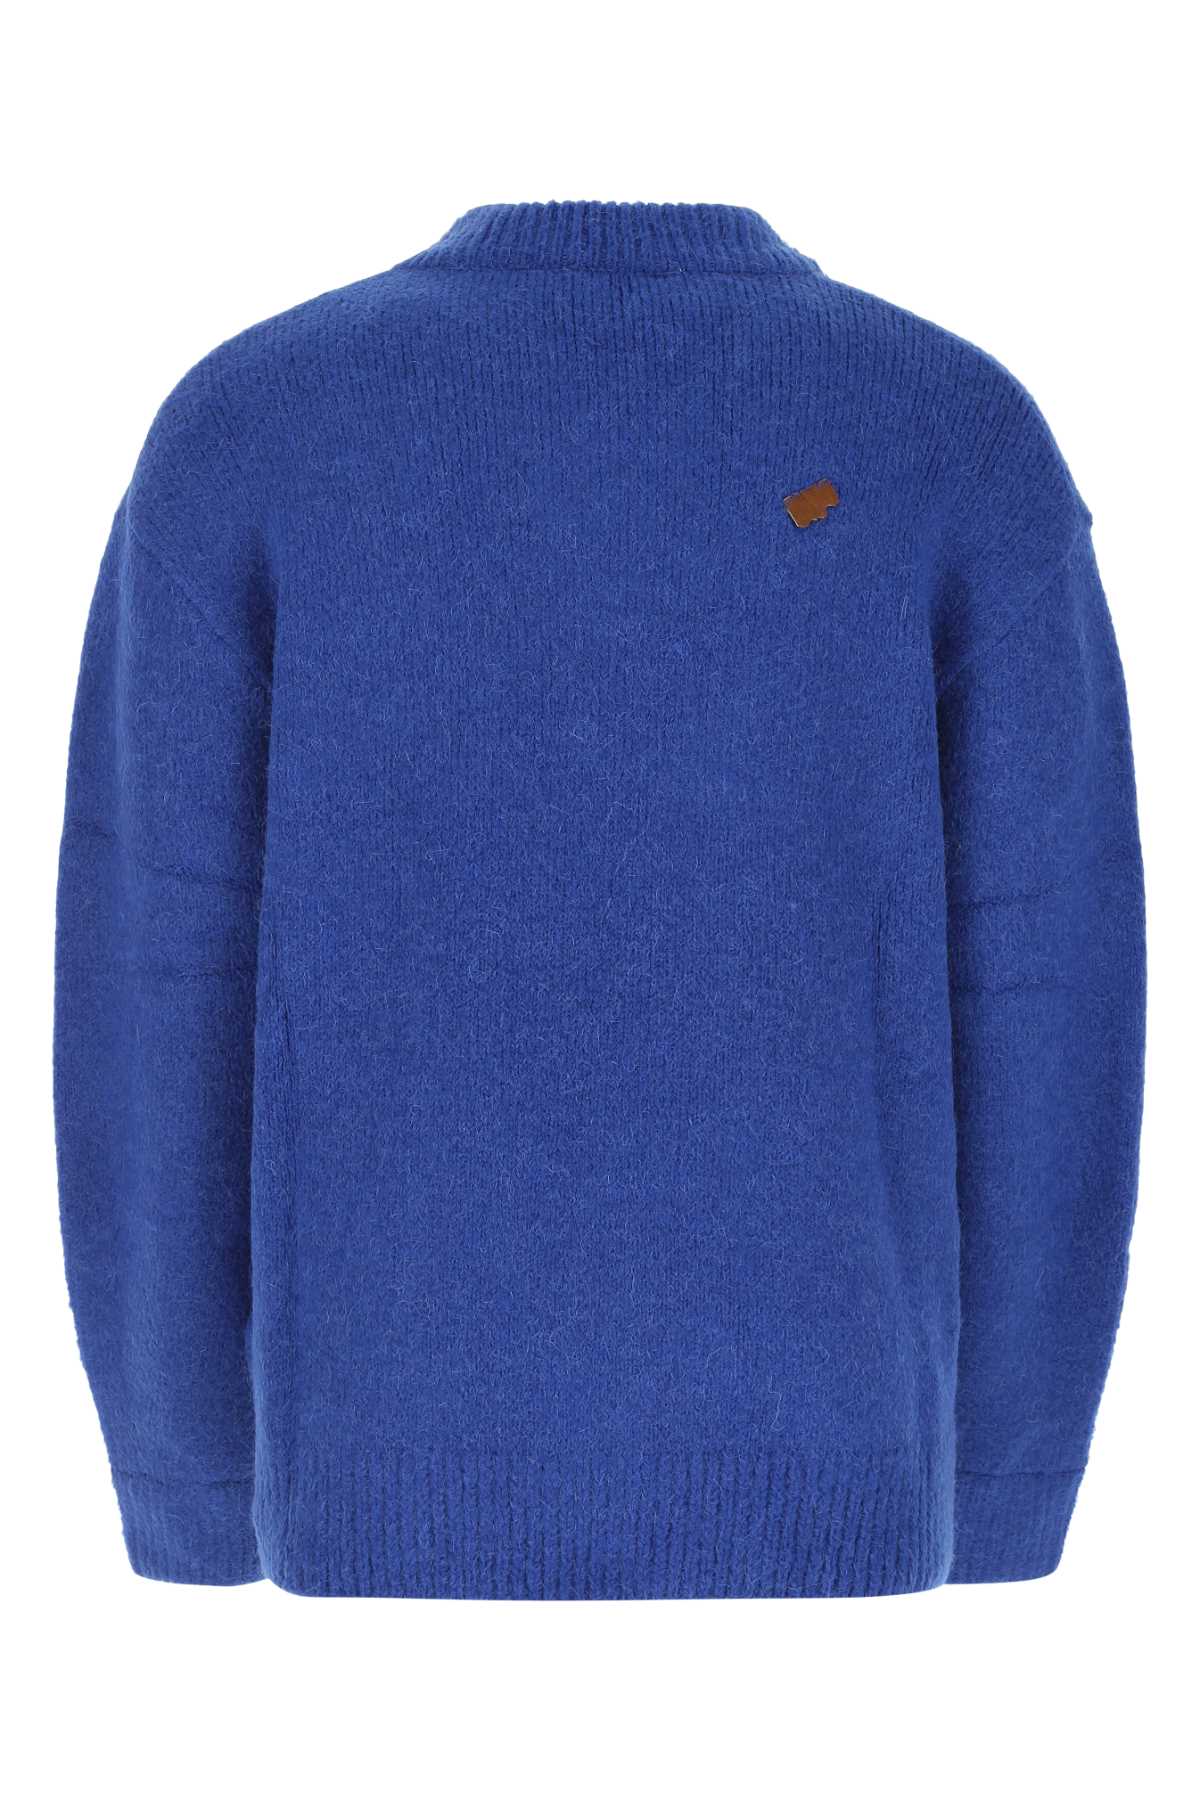 Shop Ader Error Electric Blue Acrylic Blend Sweater